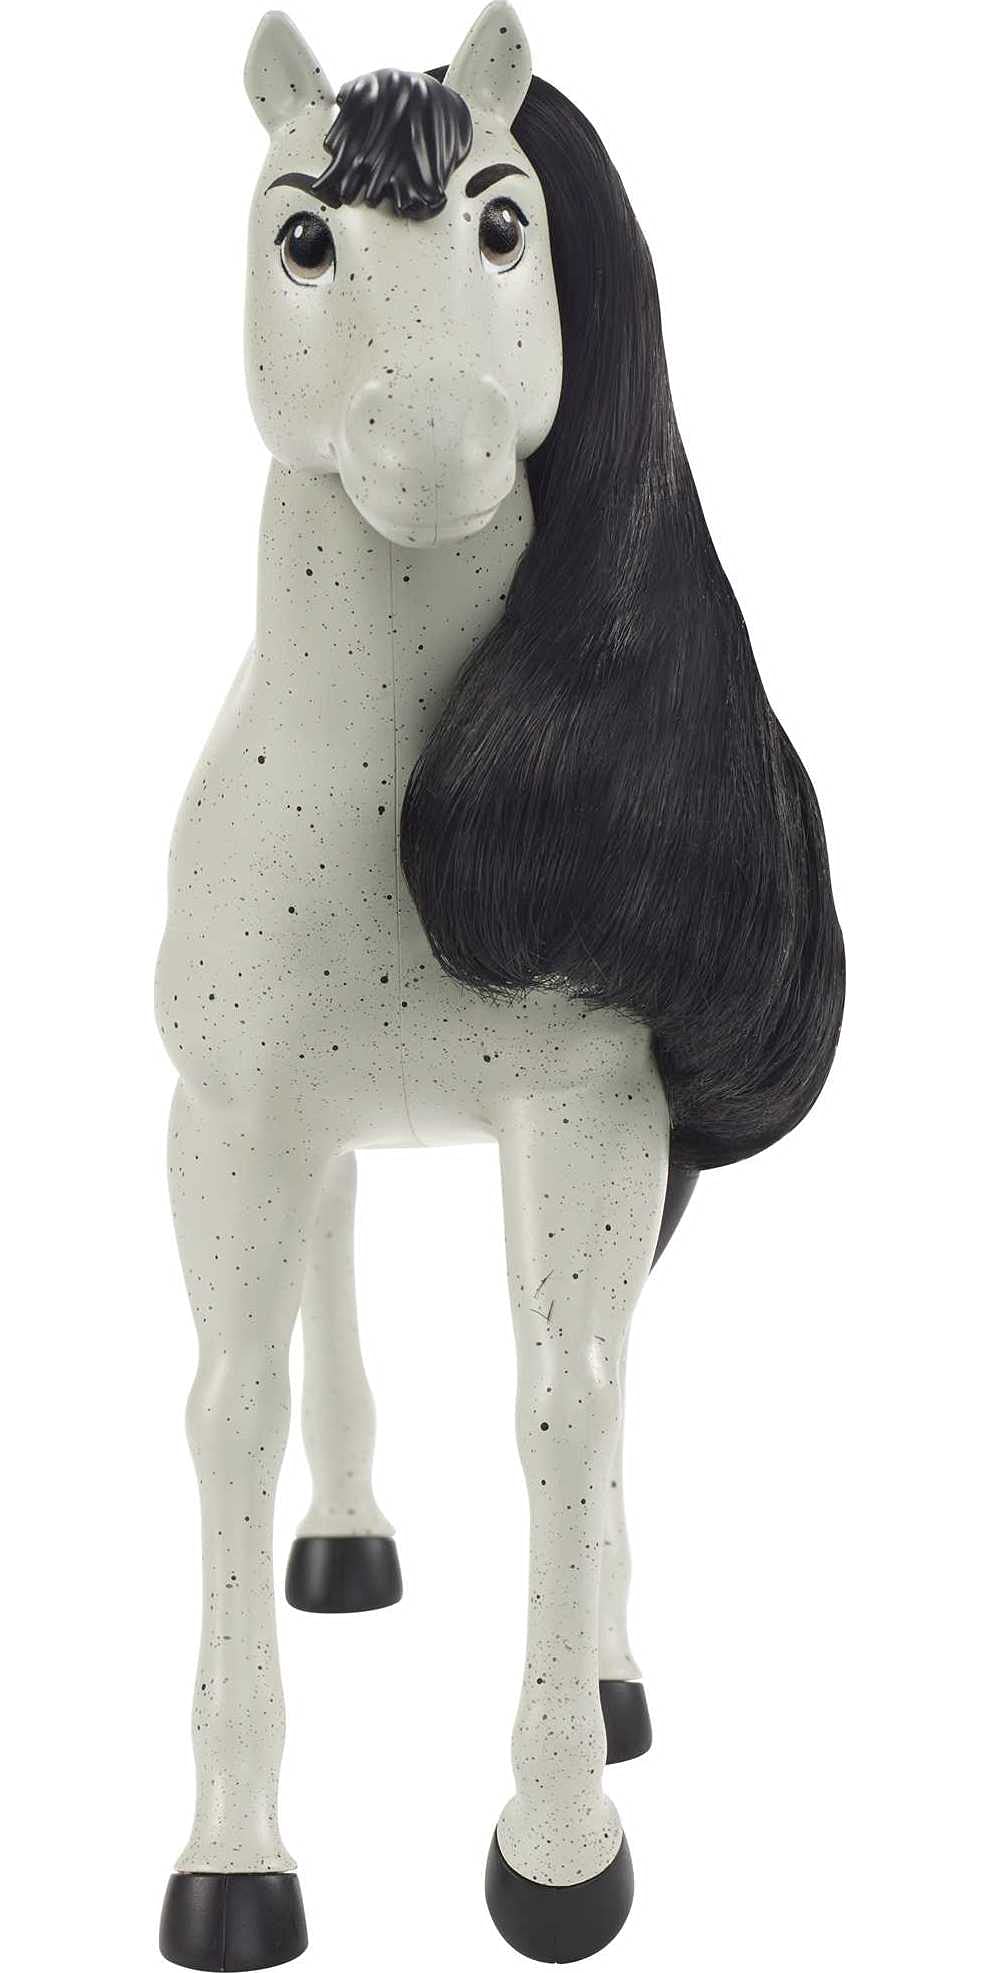 Mattel Spirit Untamed Herd Horse (8-in/20.32), Moving Head, Long Mane, Playful Stance & Beautiful Color, Great Gift for Horse Fans Ages 3 Years Old & Up